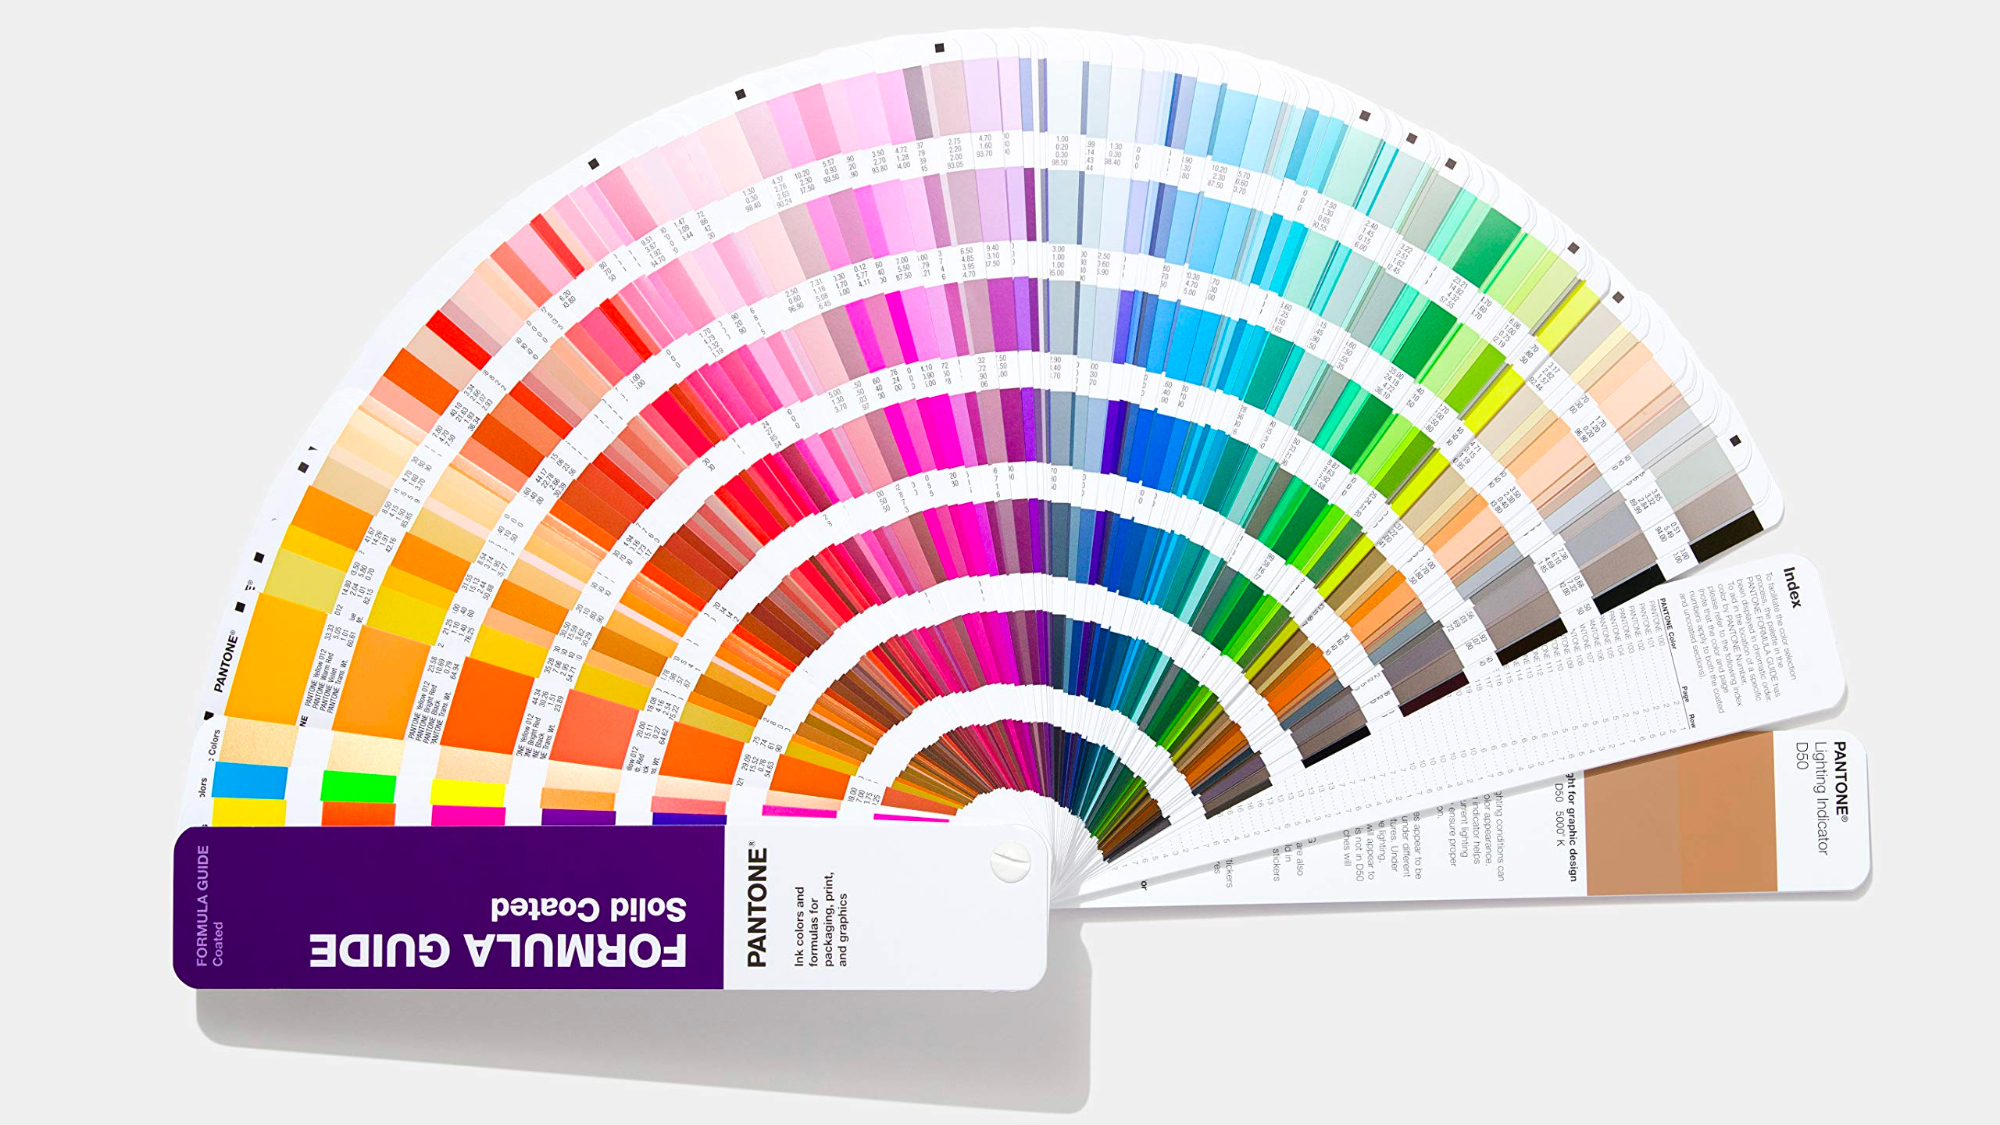 The Pantone Color guide